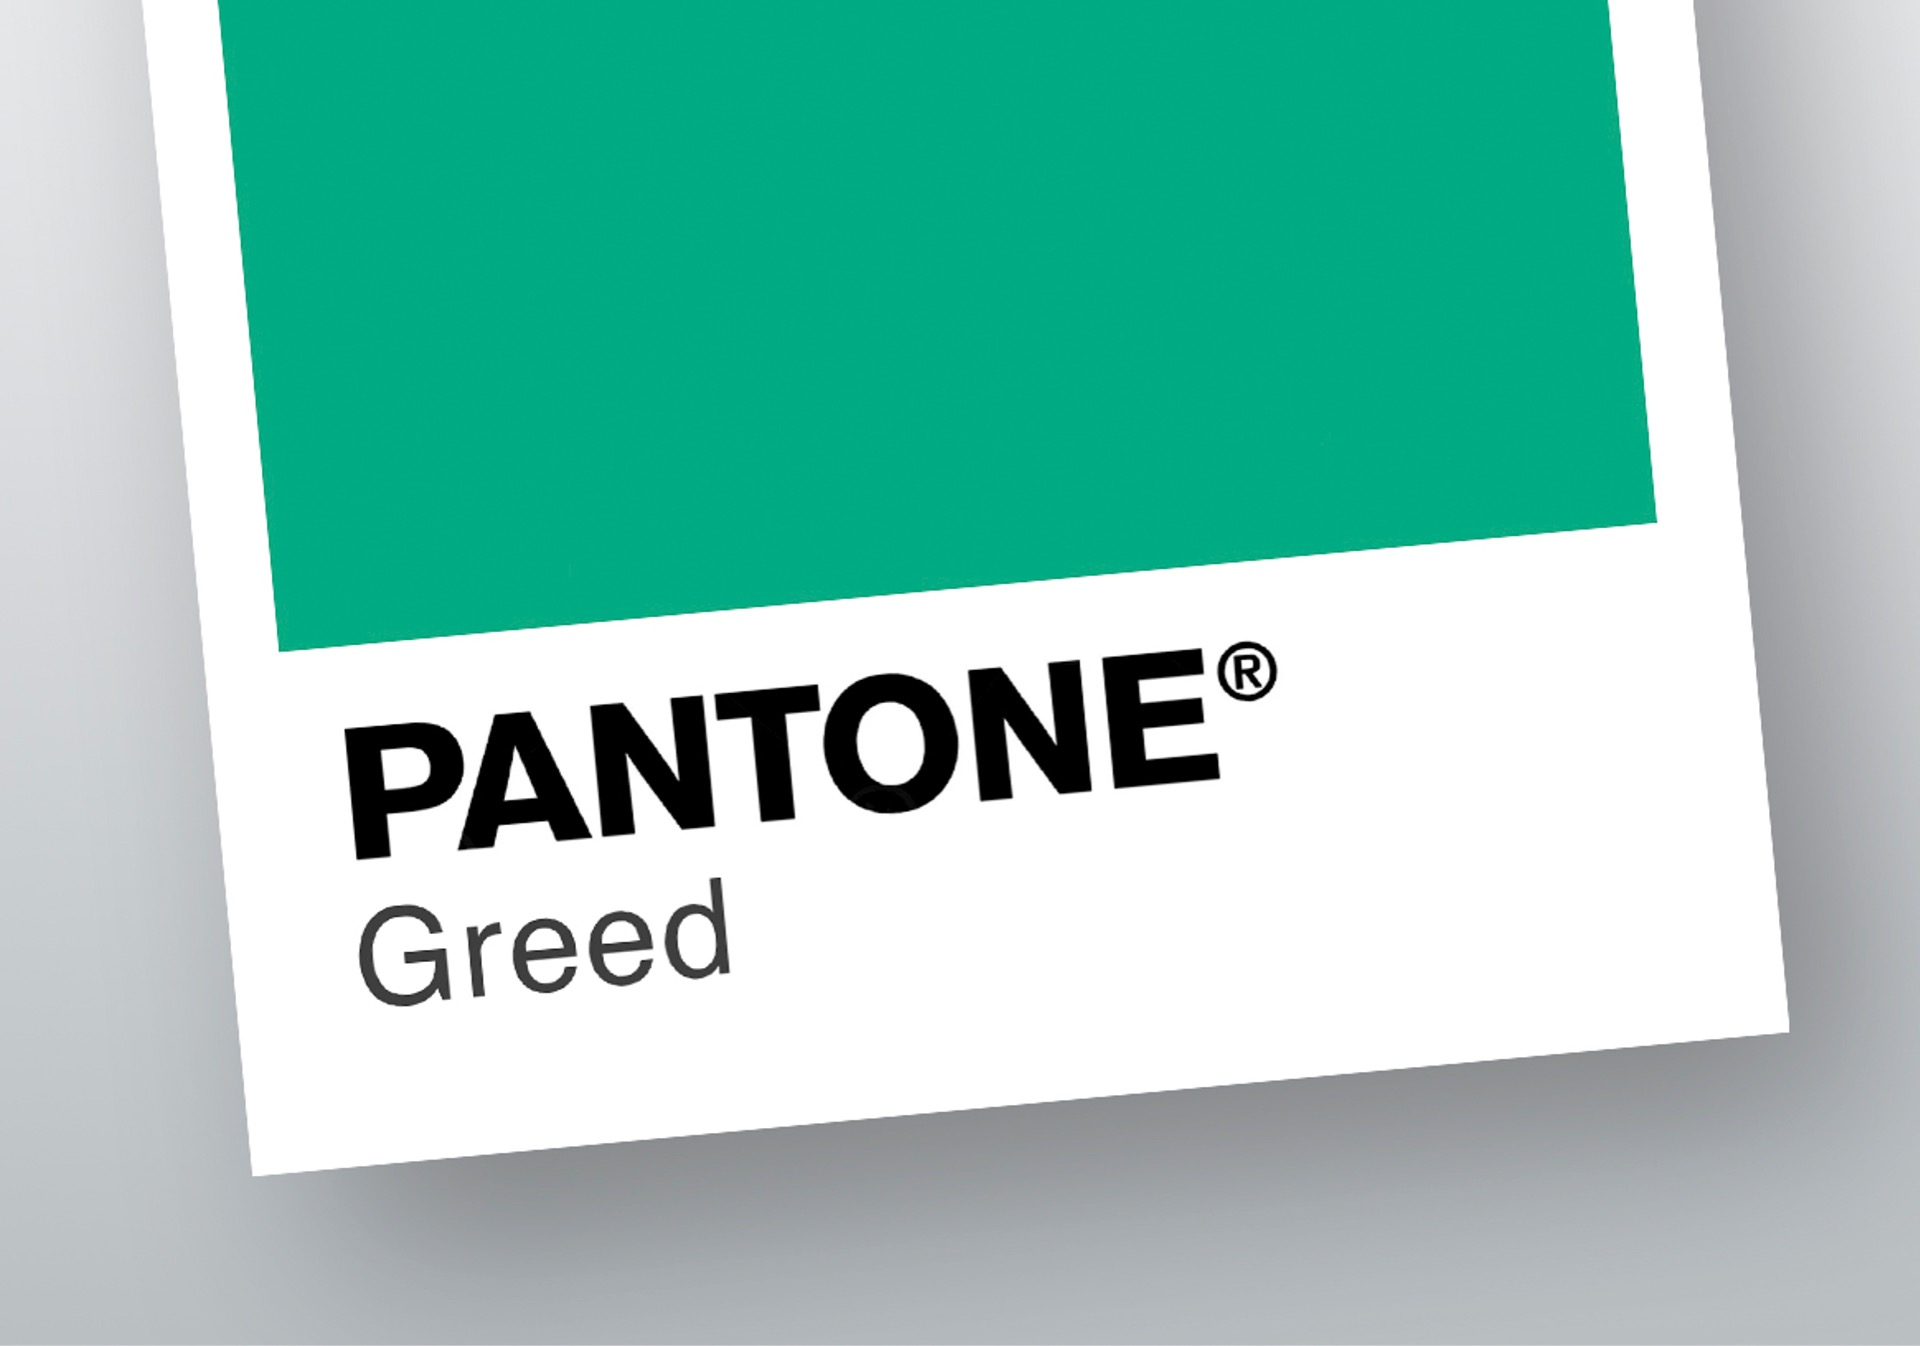 A Pantone 'Greed' swatch